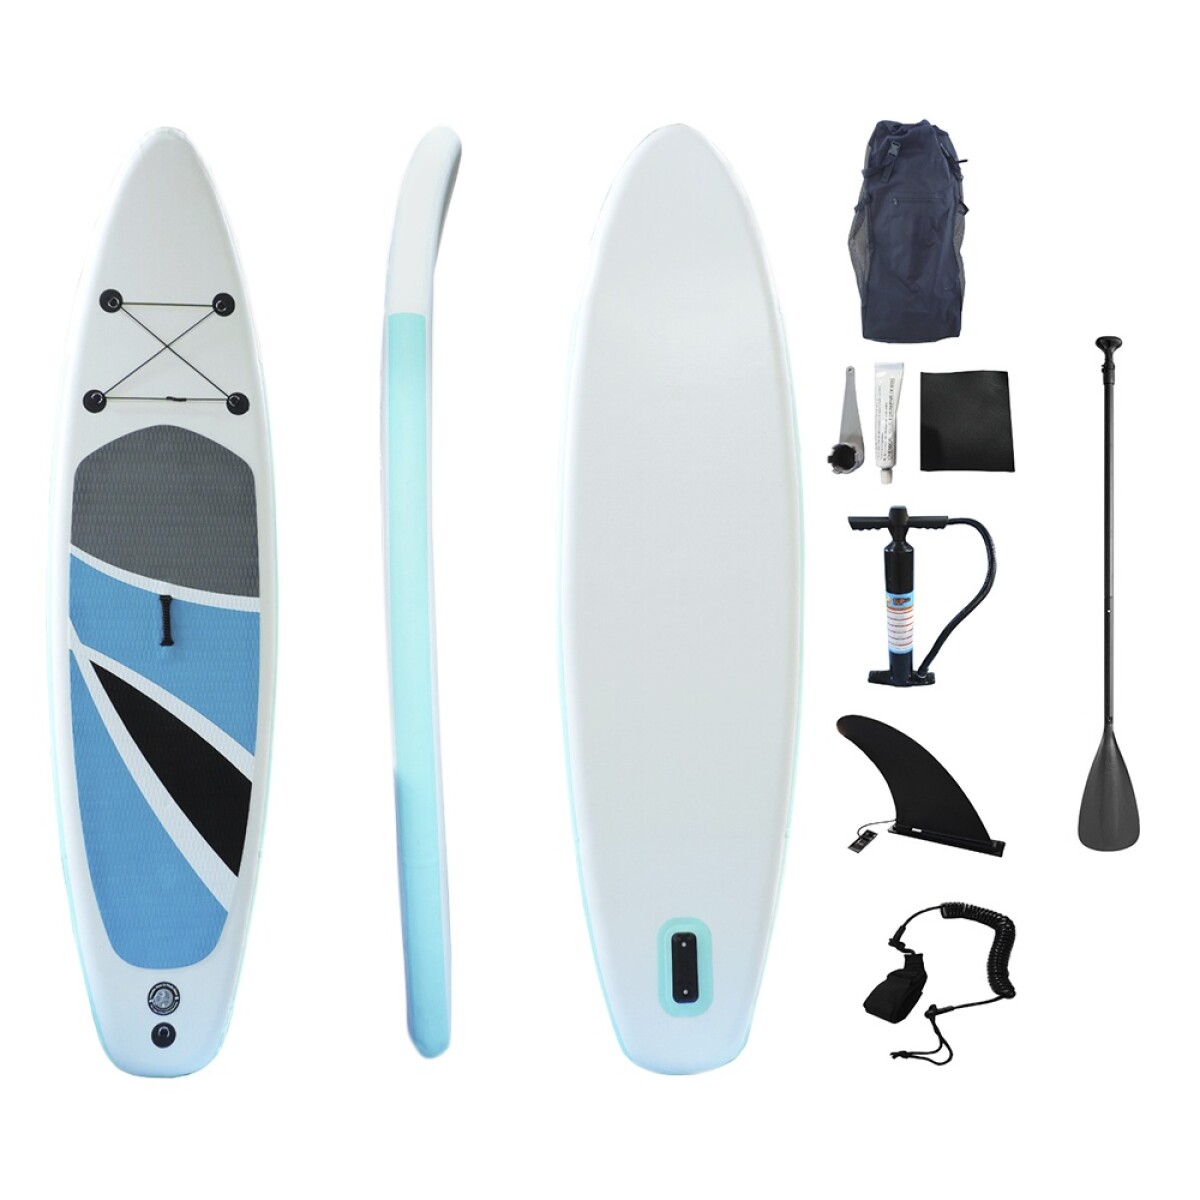 Tabla Stand Up Paddle Sup 320 + Remo + Inflador + Bolso - Blanco 